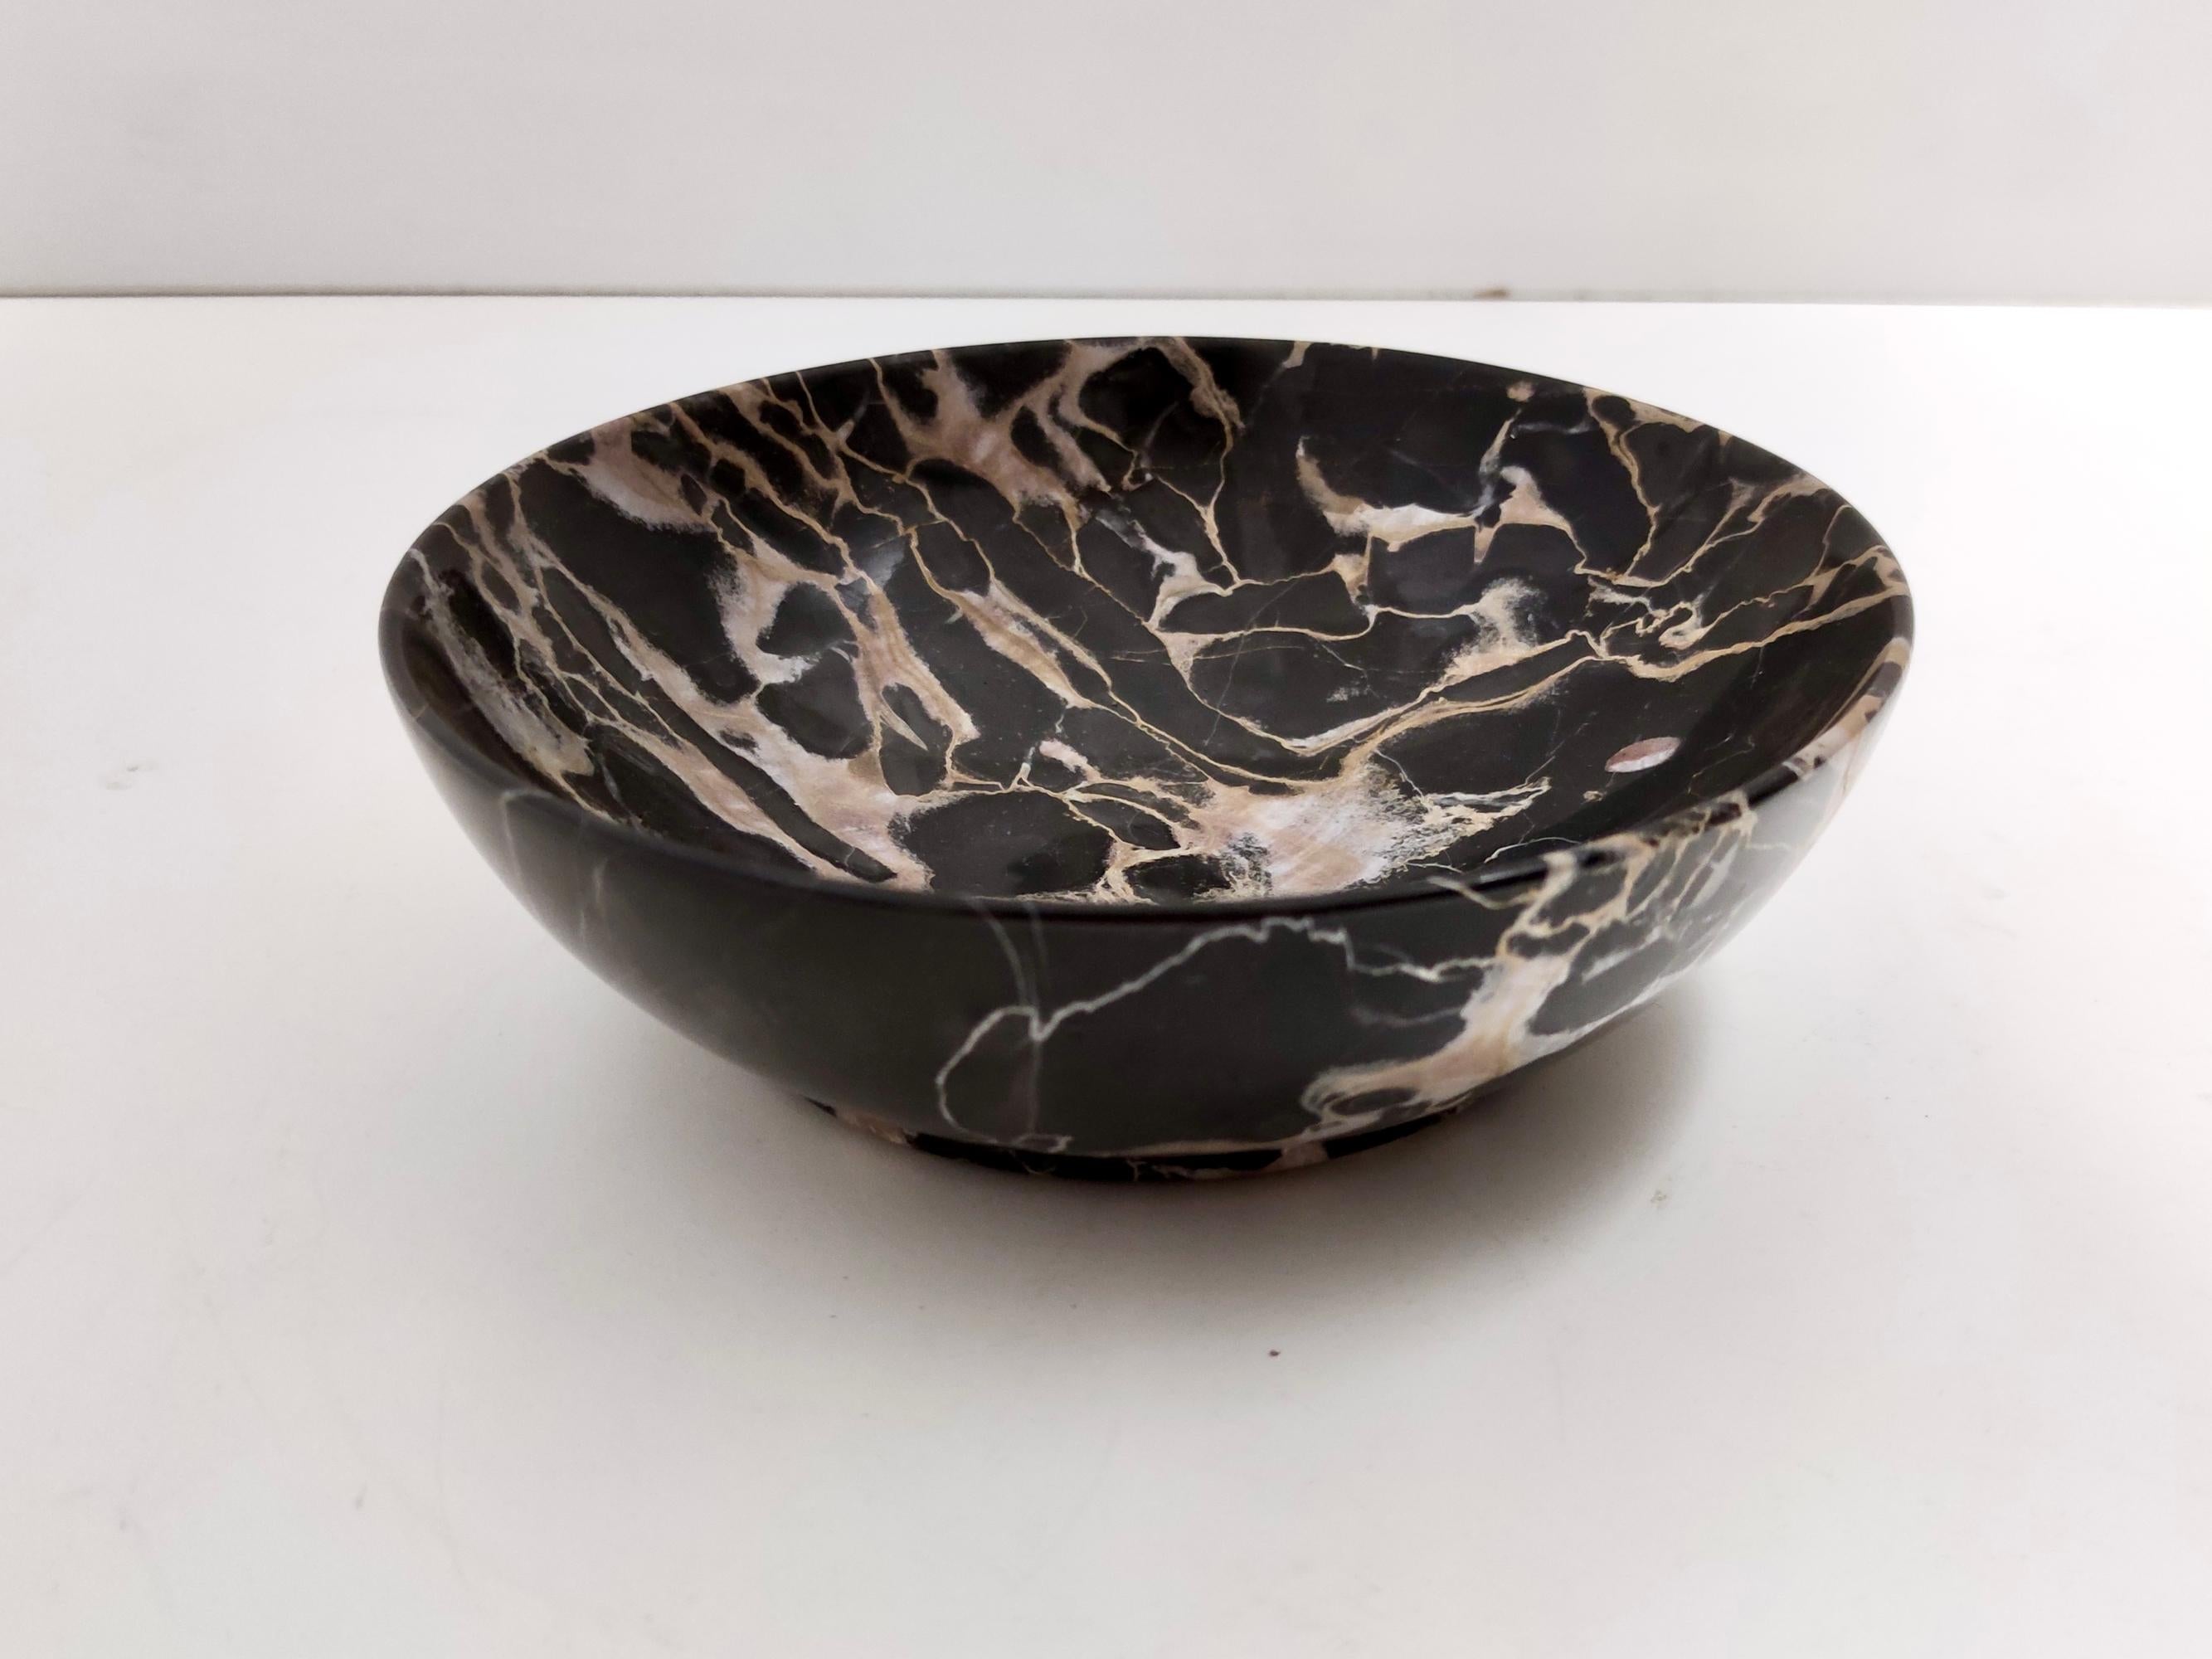 Postmodern Round Portoro Marble Ashtray - Trinket Bowl - Vide poche, Italy In Excellent Condition For Sale In Bresso, Lombardy